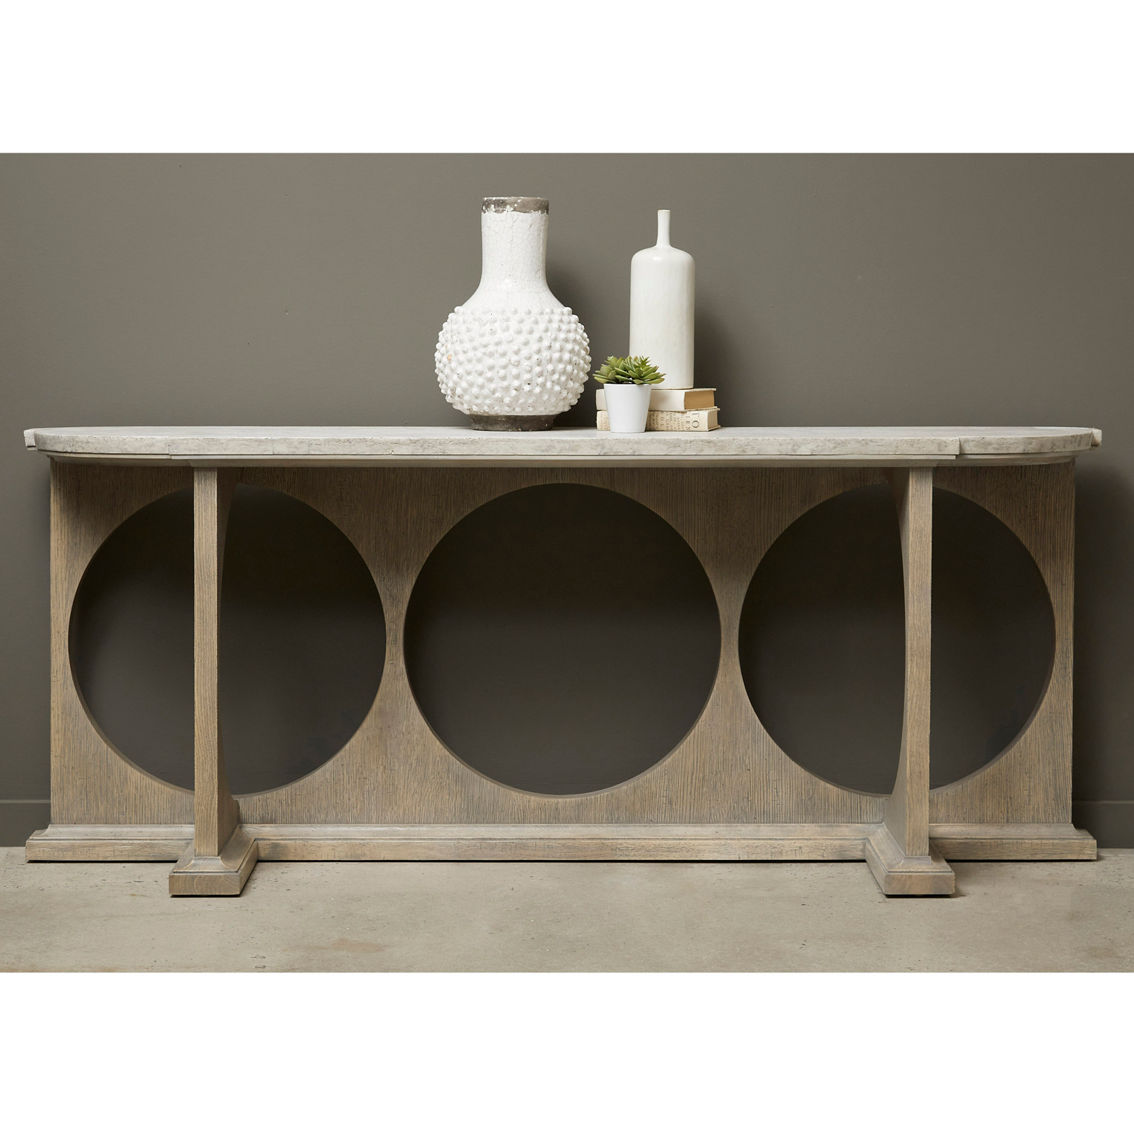 Pulaski Furniture Modern Entryway Console Table with Concrete Top - Image 4 of 4